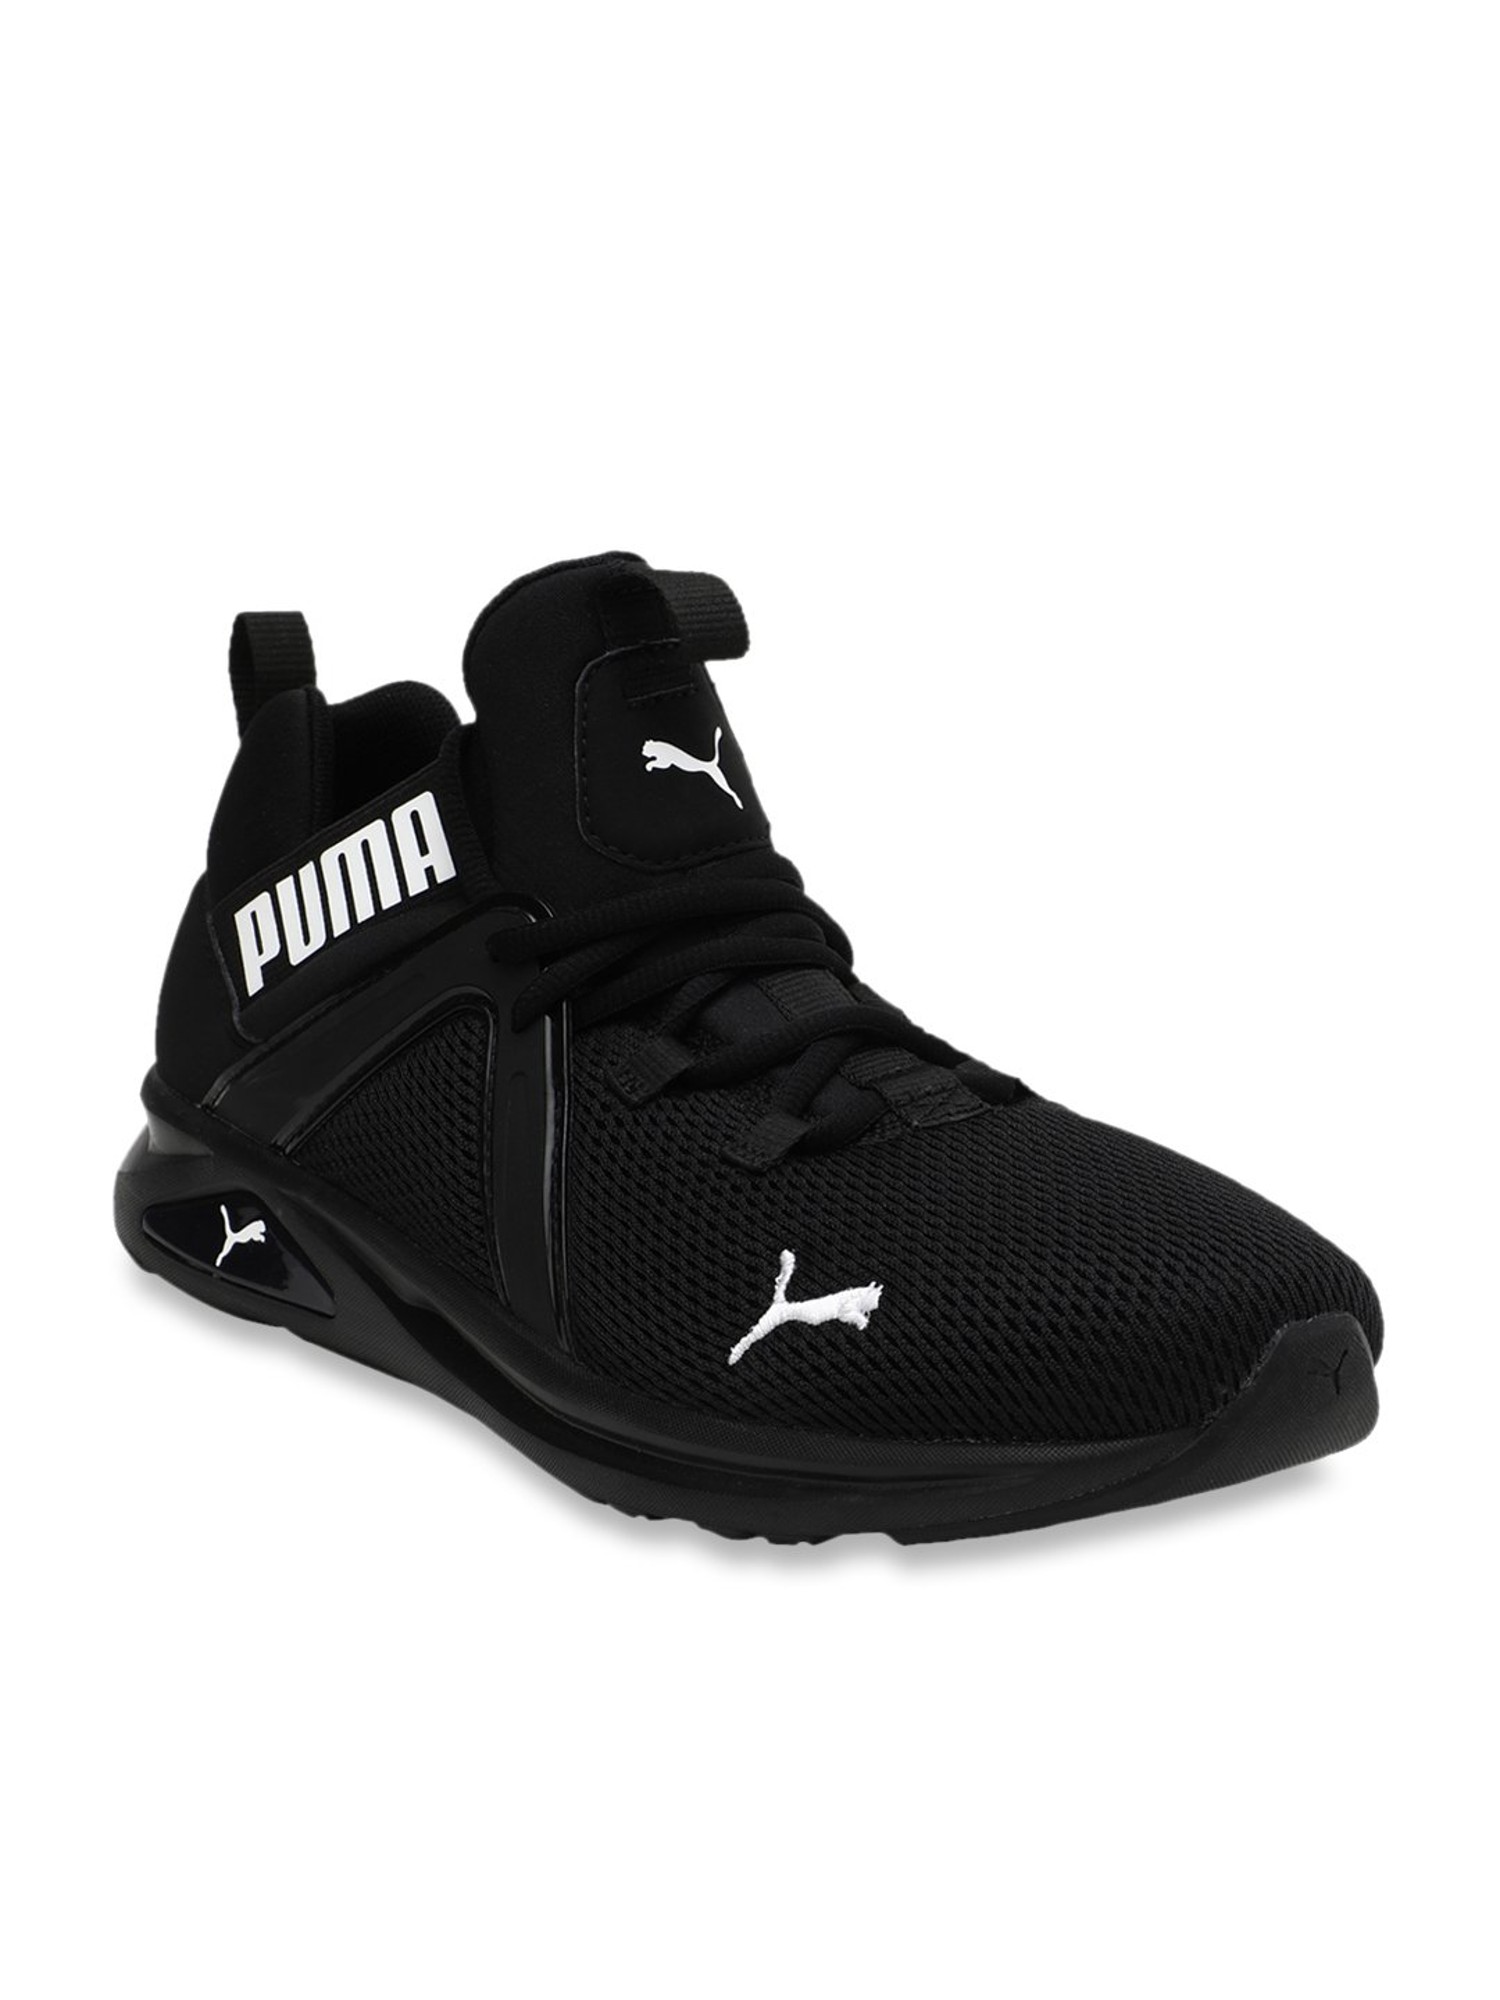 Buy Puma Enzo 2 Black Running Shoes for 